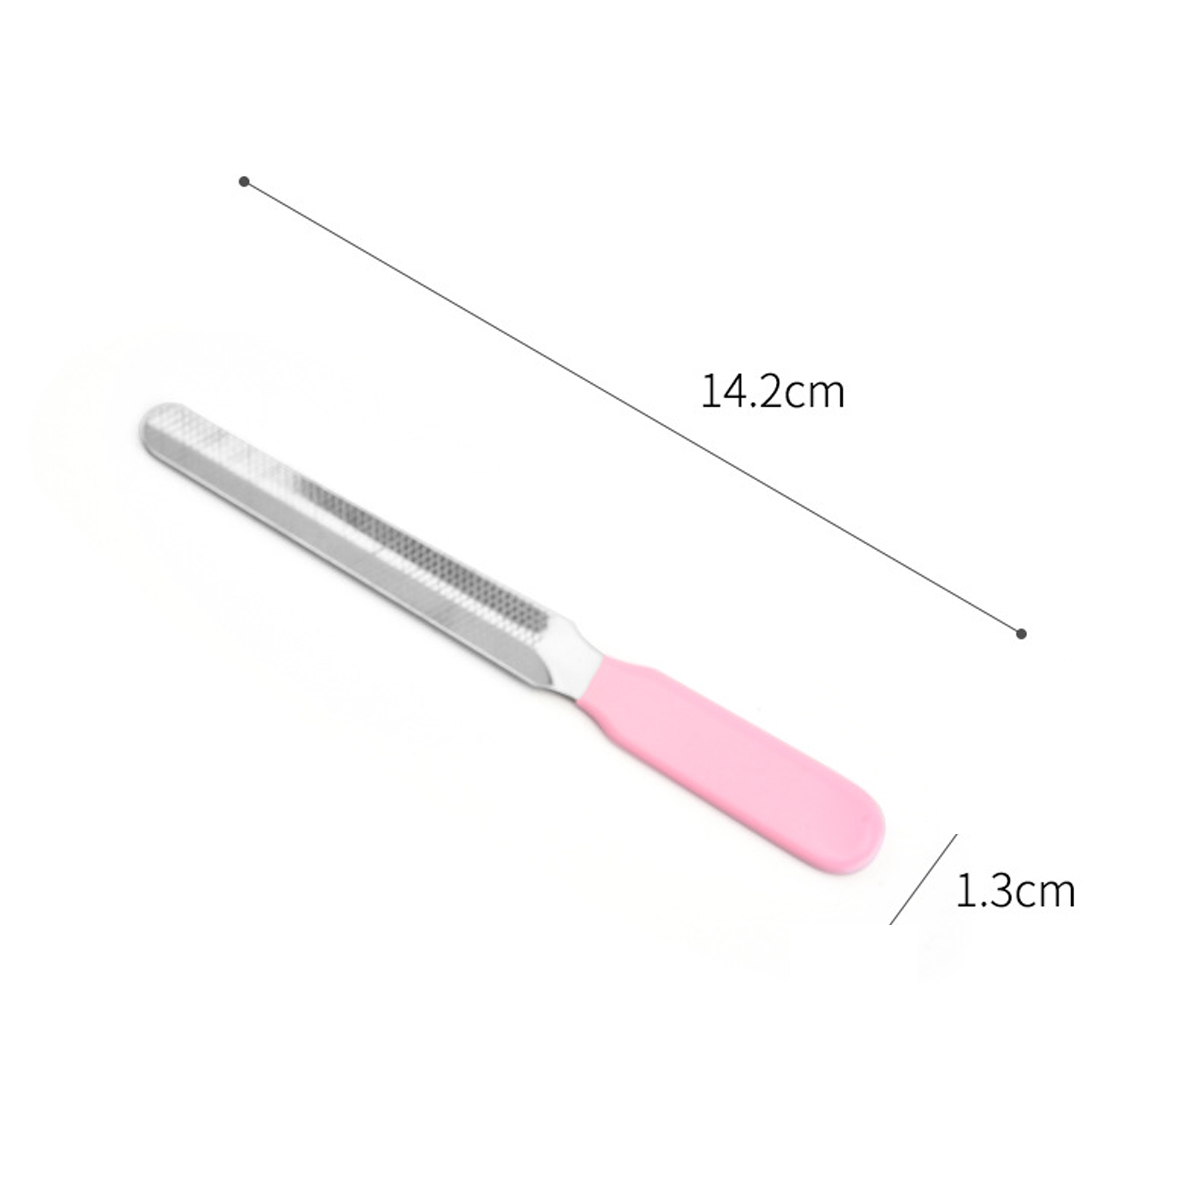 Stainless-Steel-Pet-Nail-Clipper-Nail-File-Trimmer-With-Safety-Guard-For-Dogs-And-Cats-1724332-6